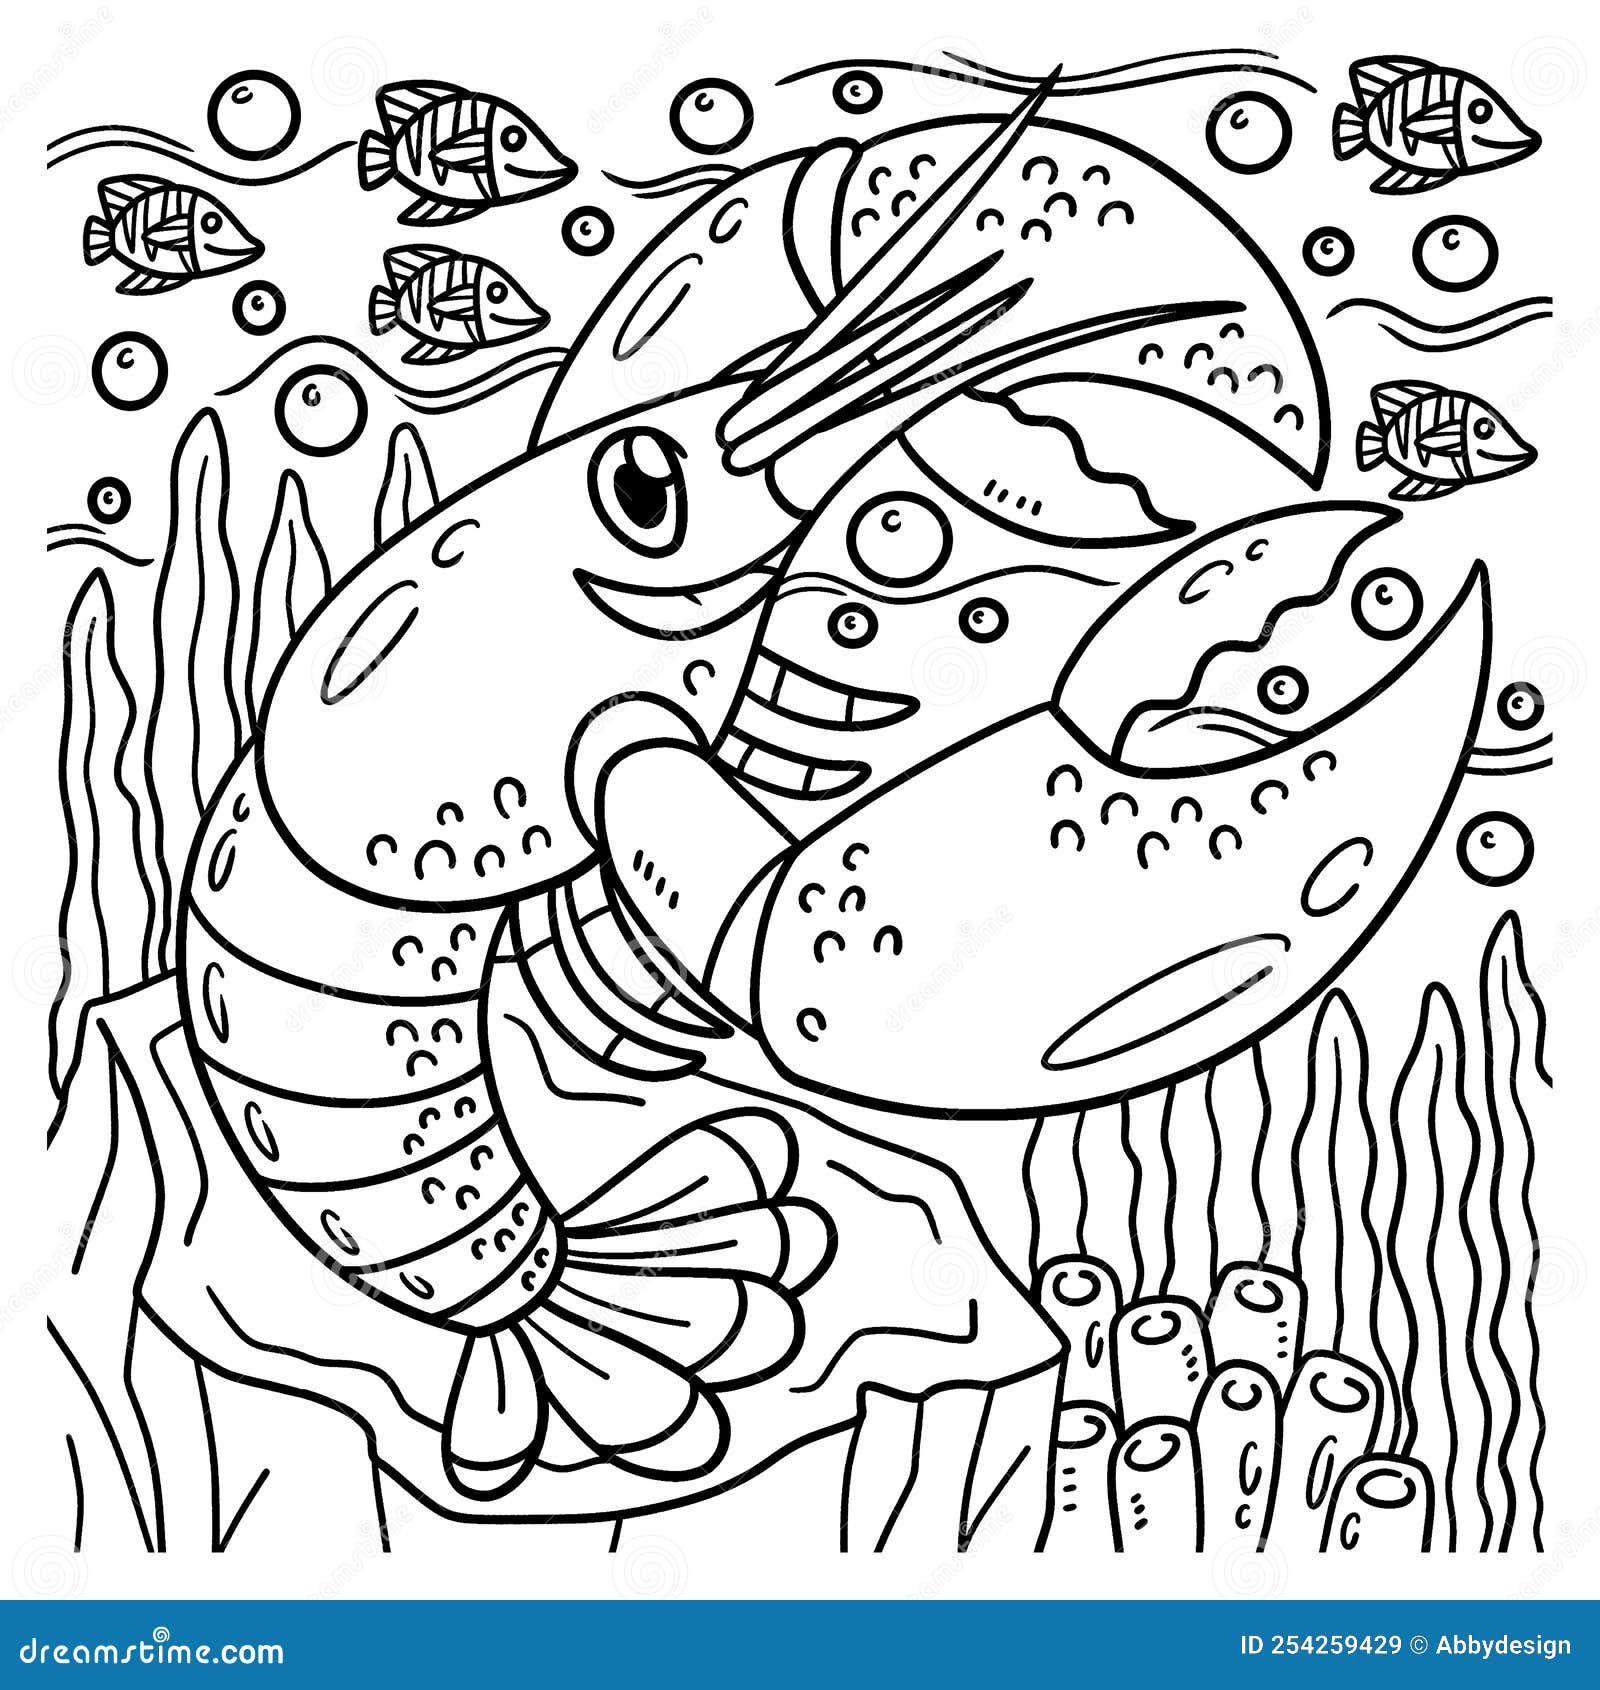 Lobster coloring page for kids stock vector